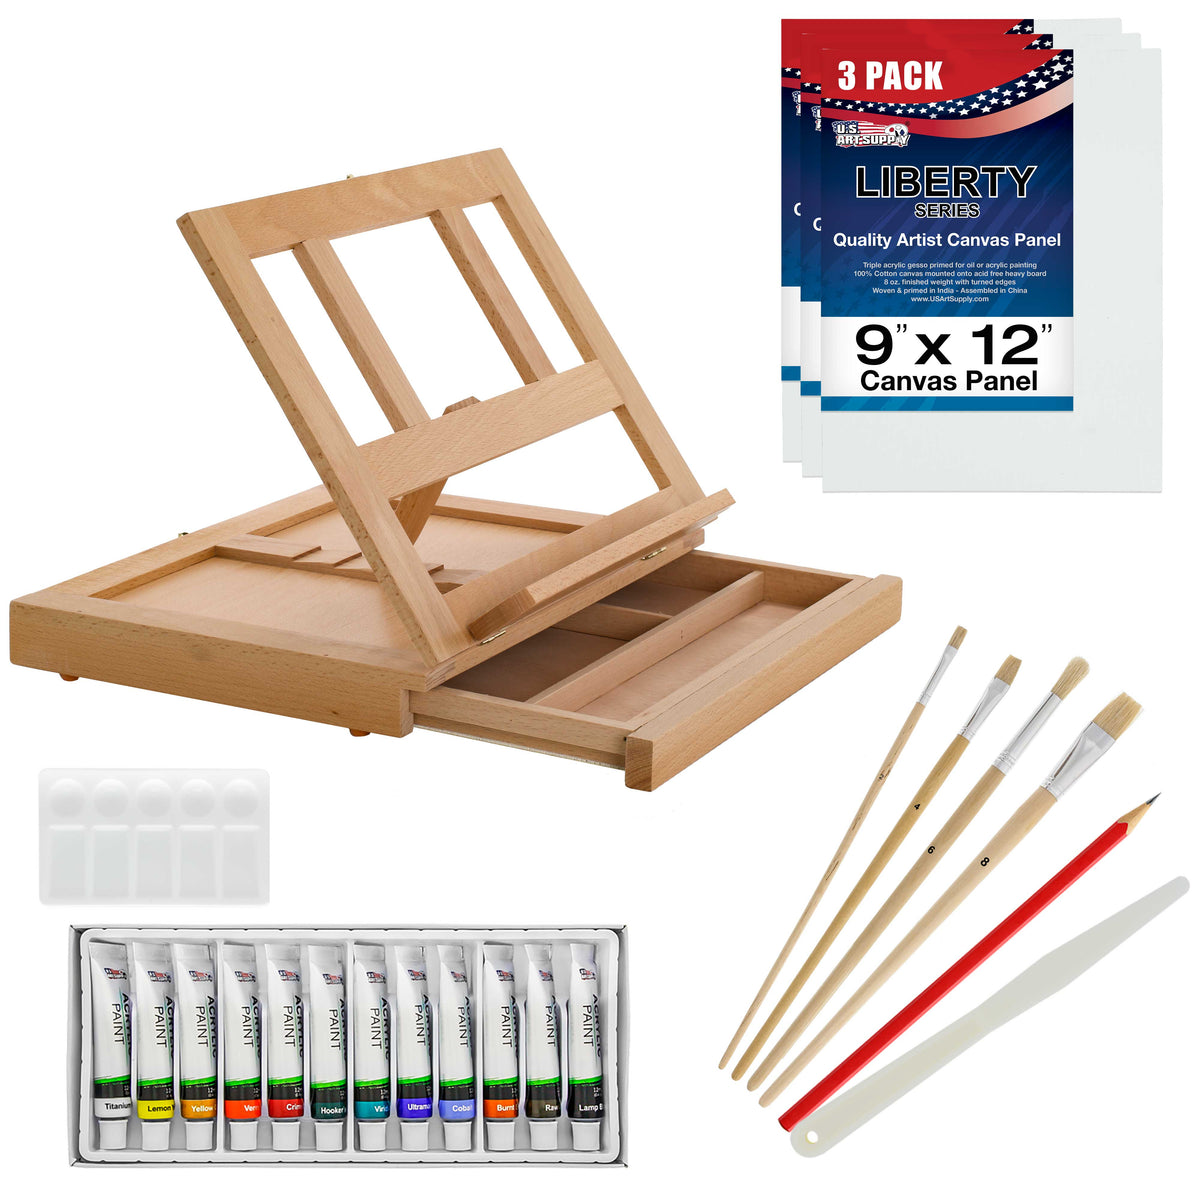 Artist Painting Set with Wood Desk Table Easel 12 Acrylic Paint Colors — U.S.  Art Supply